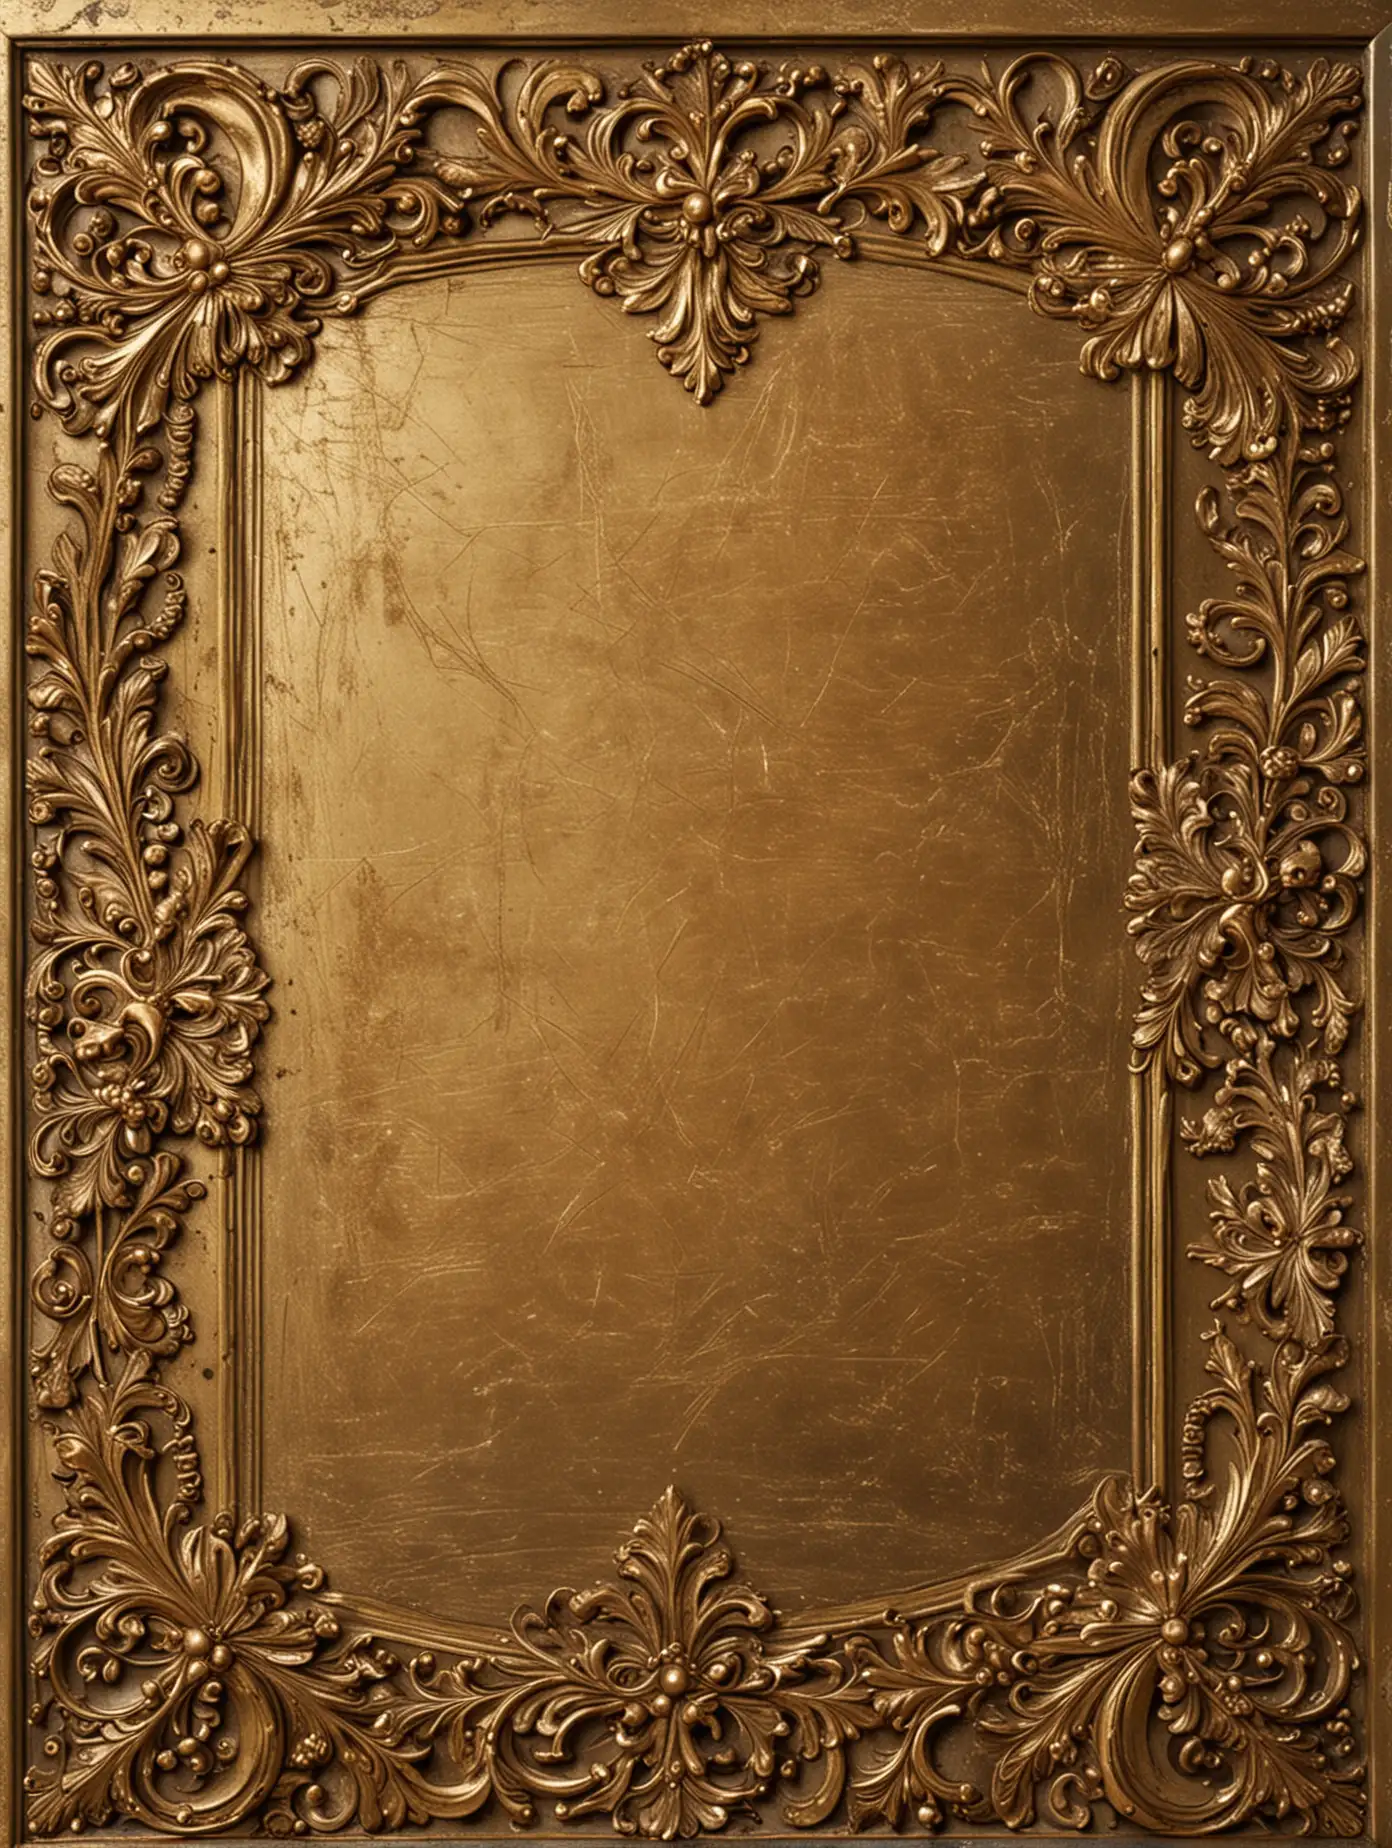 A rectangular surface with antique gold decorations on it